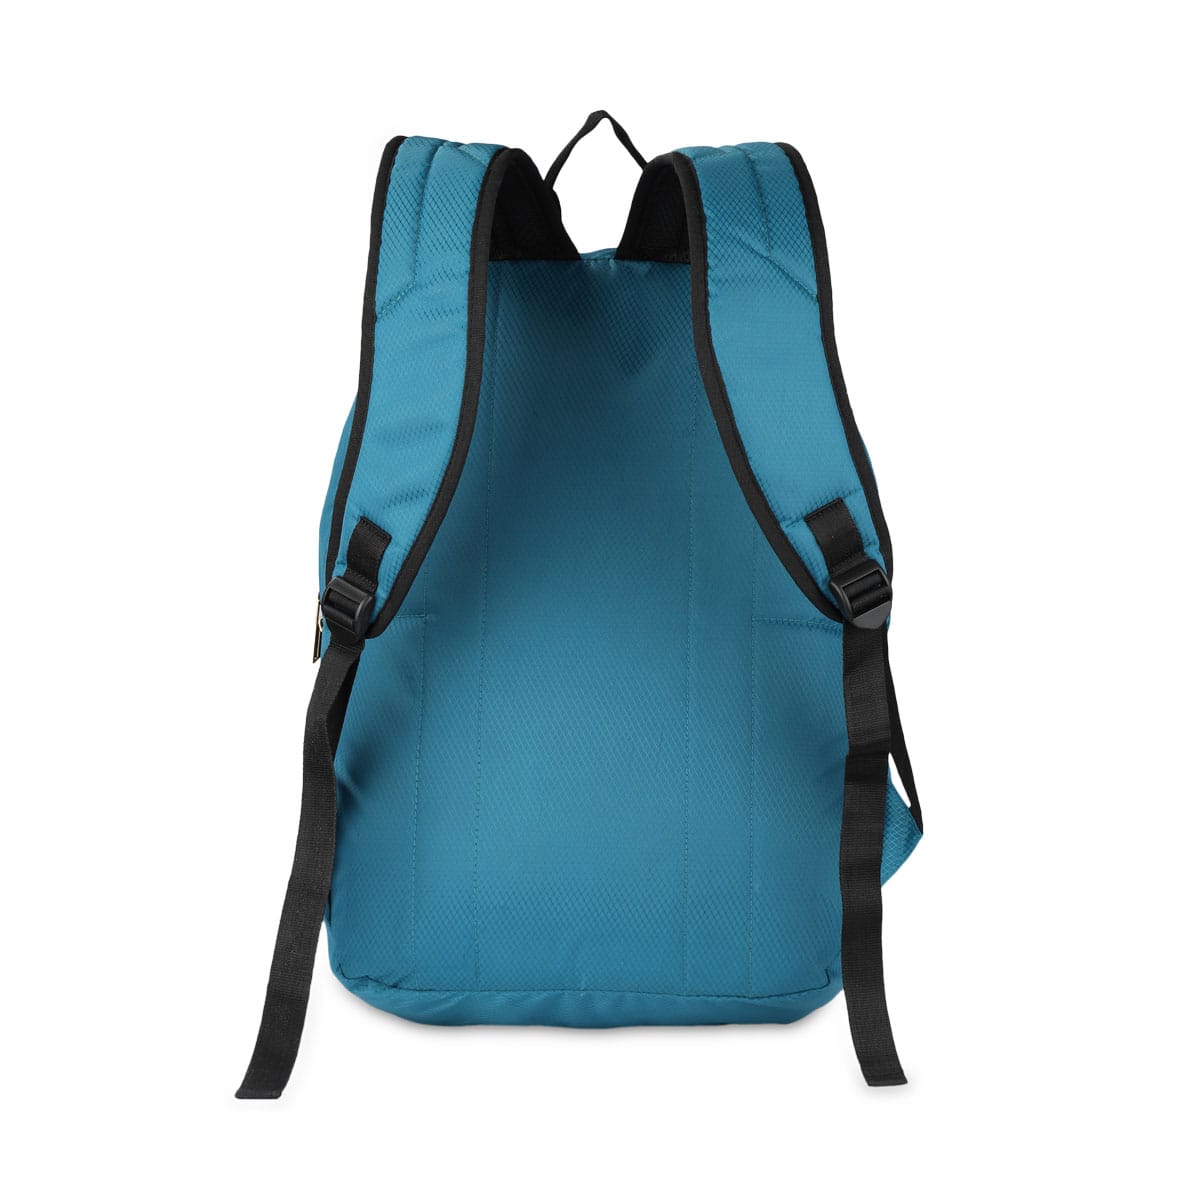 Astral | Protecta Paragon Laptop Backpack-3